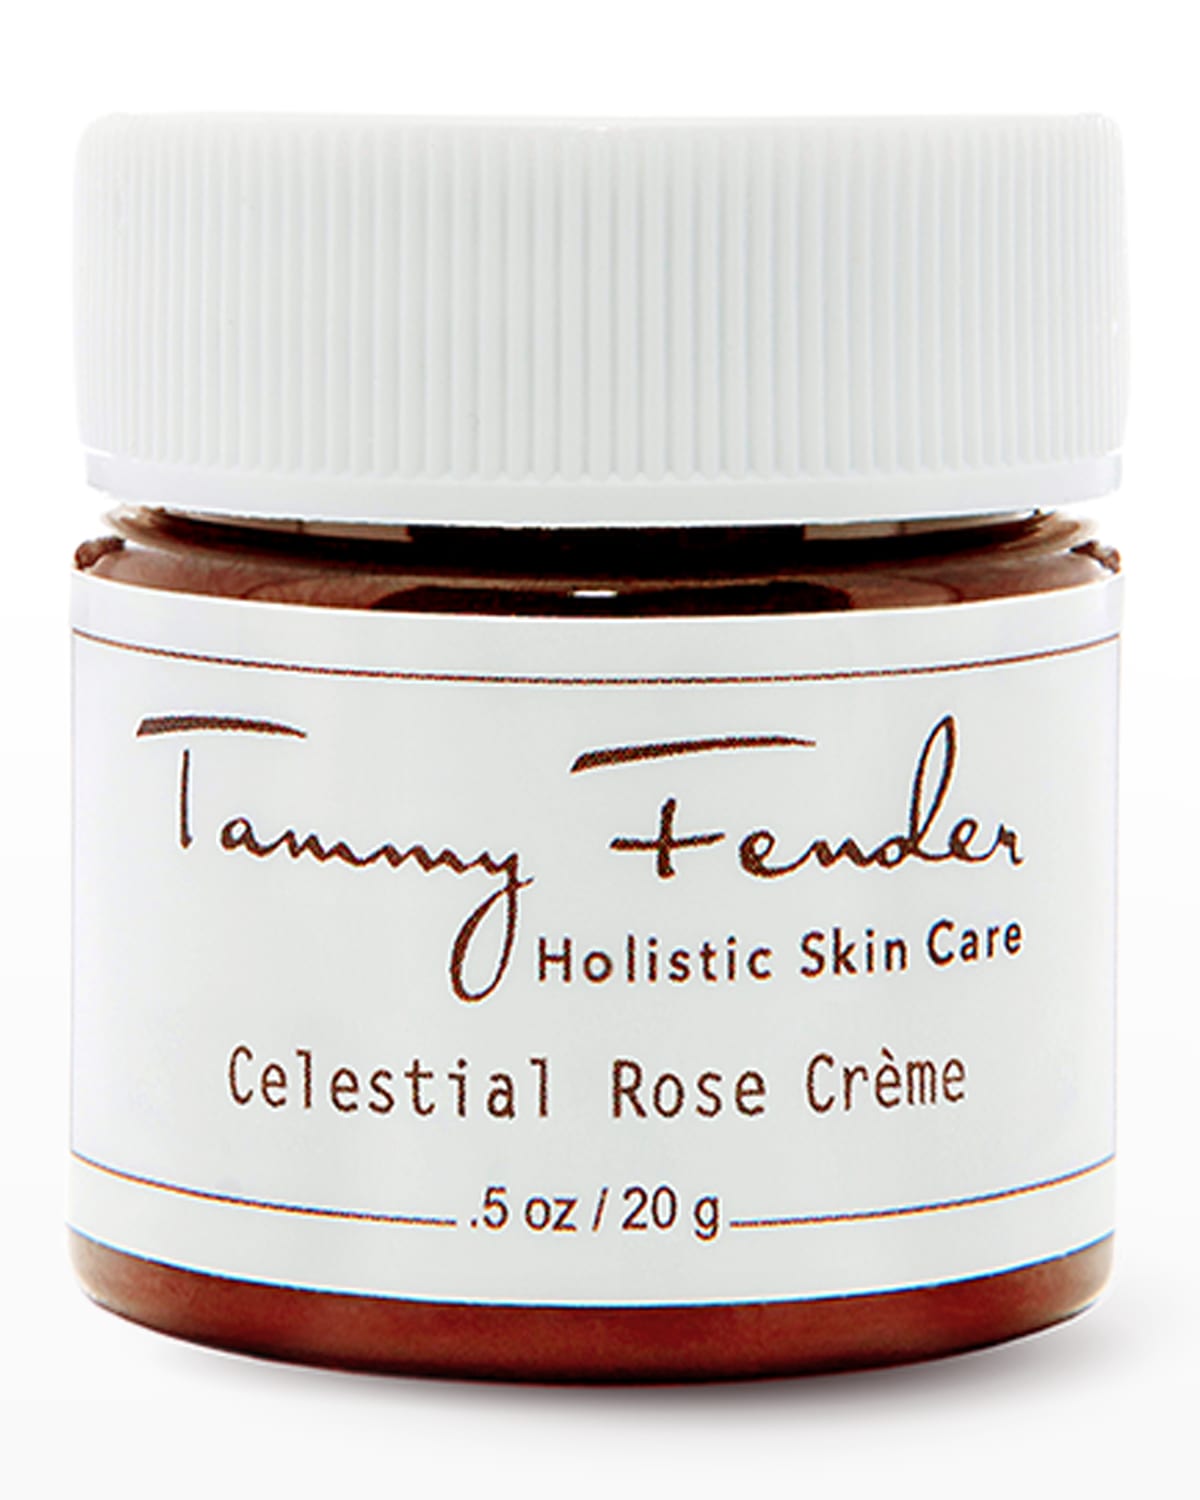 0.5 oz. Celestial Rose Creme, Yours with any $100 Tammy Fender Holistic Skin Care Purchase